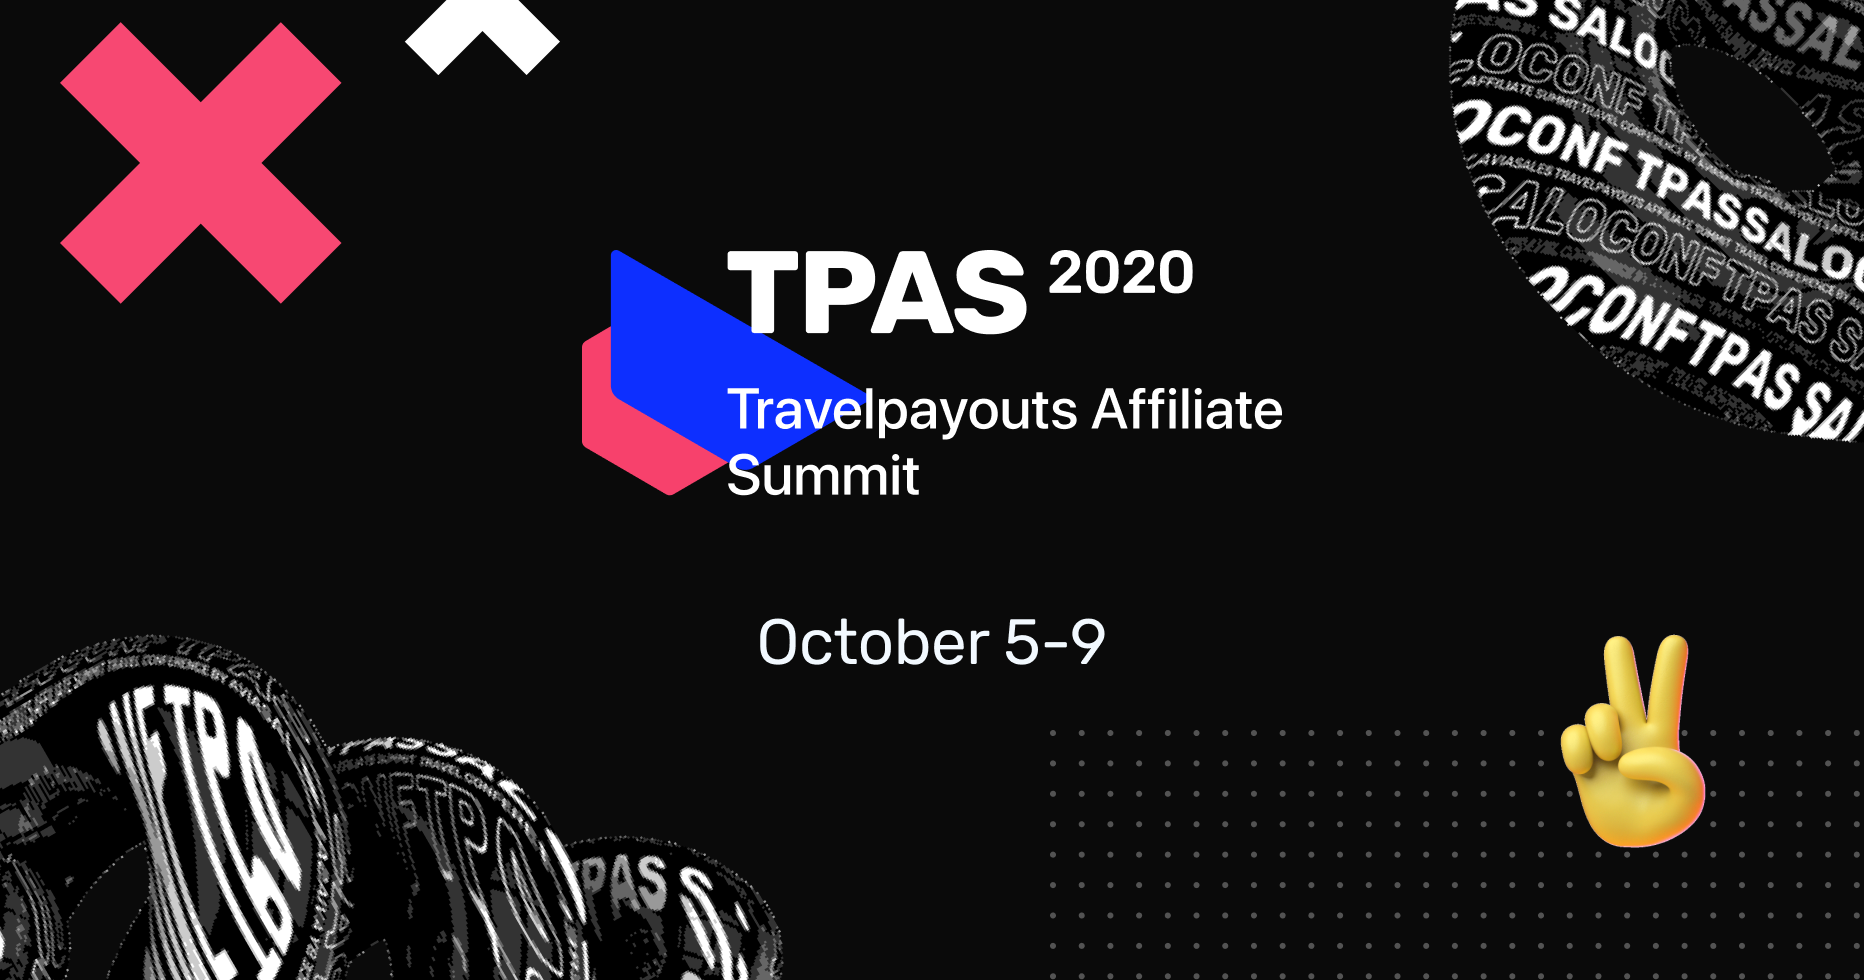 Welcome to the first online Travelpayouts Affiliate Summit